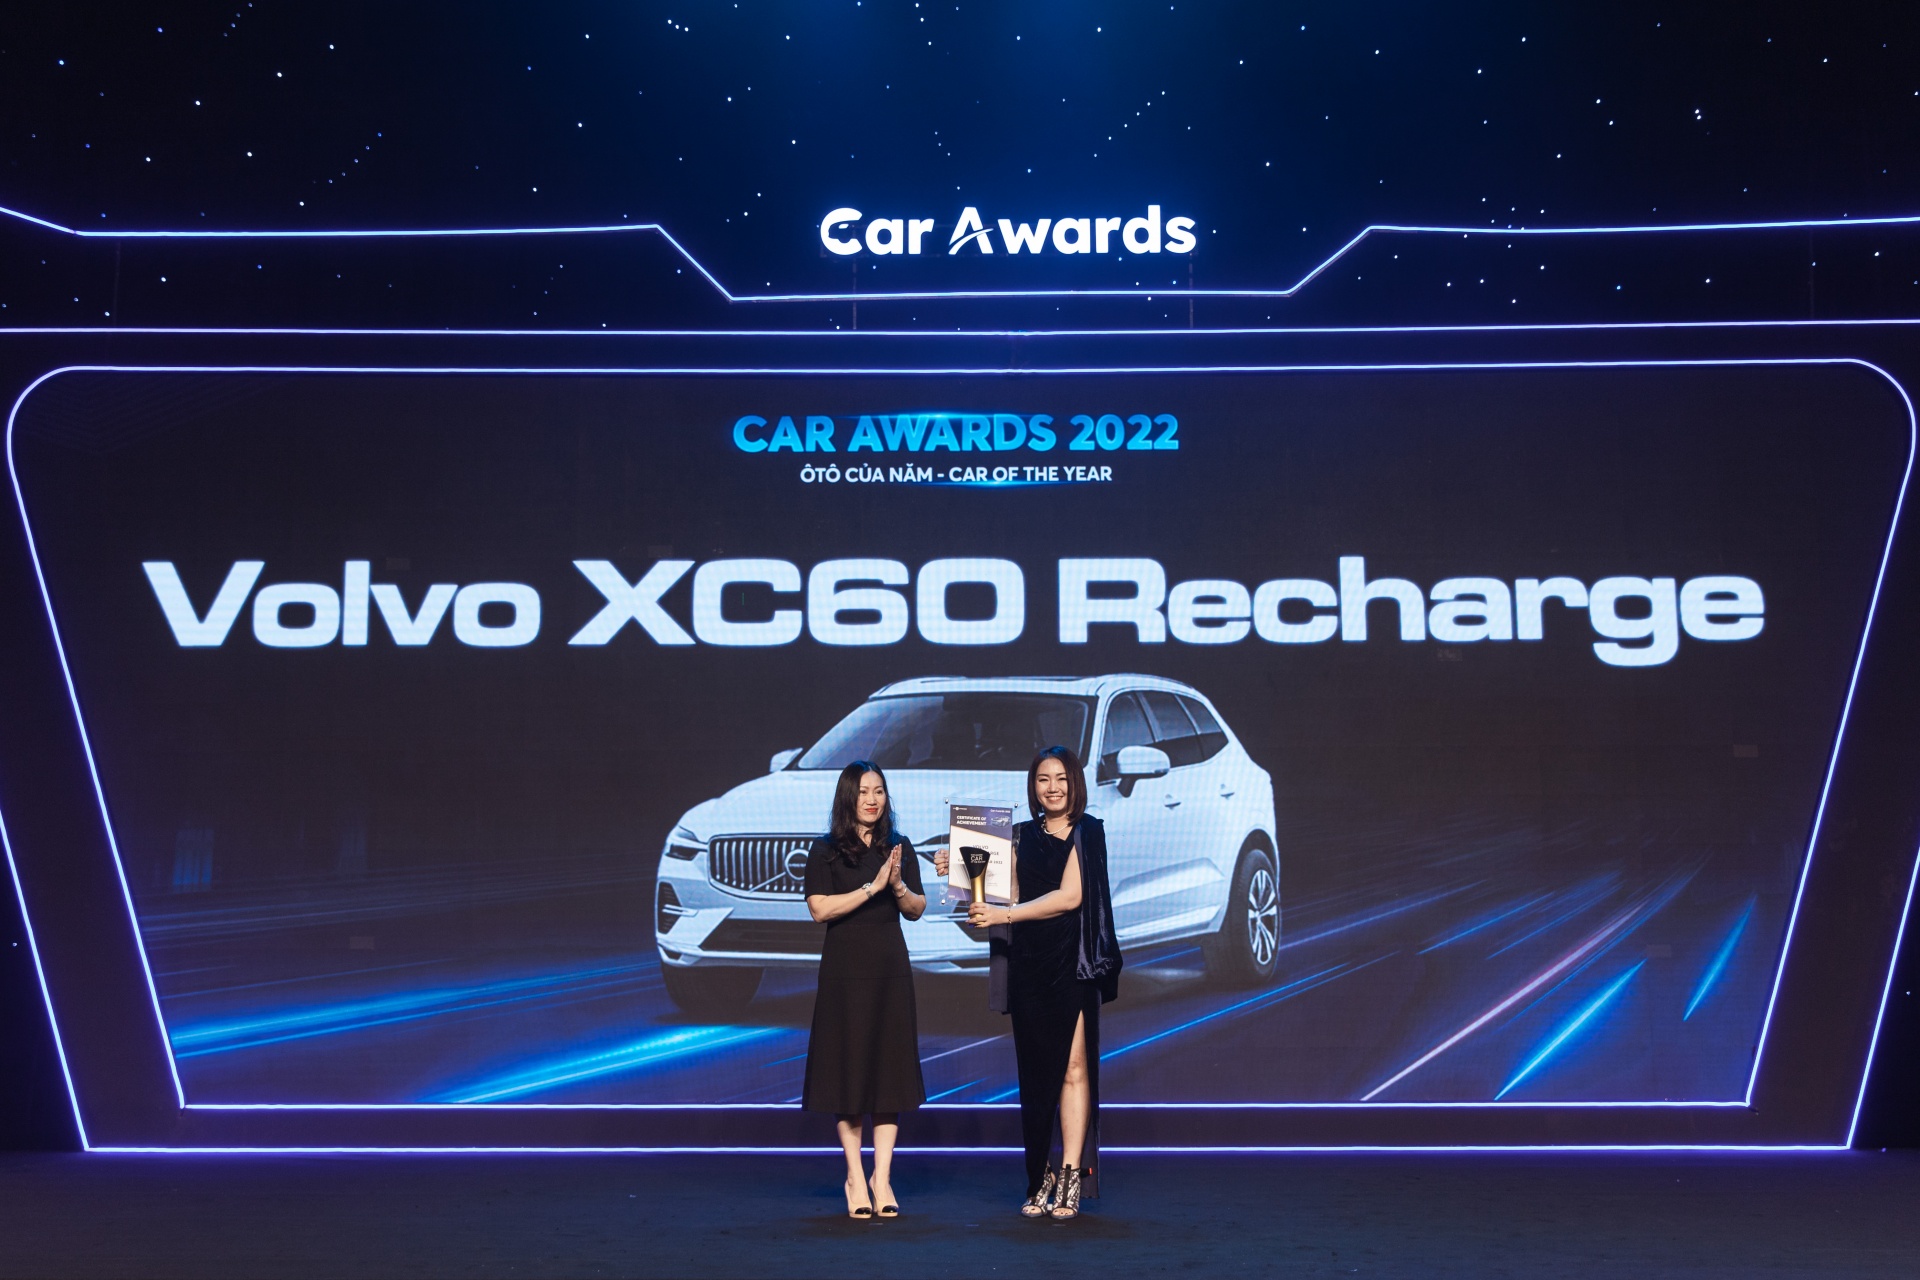 Volvo XC60 Recharge named Car of The Year 2022